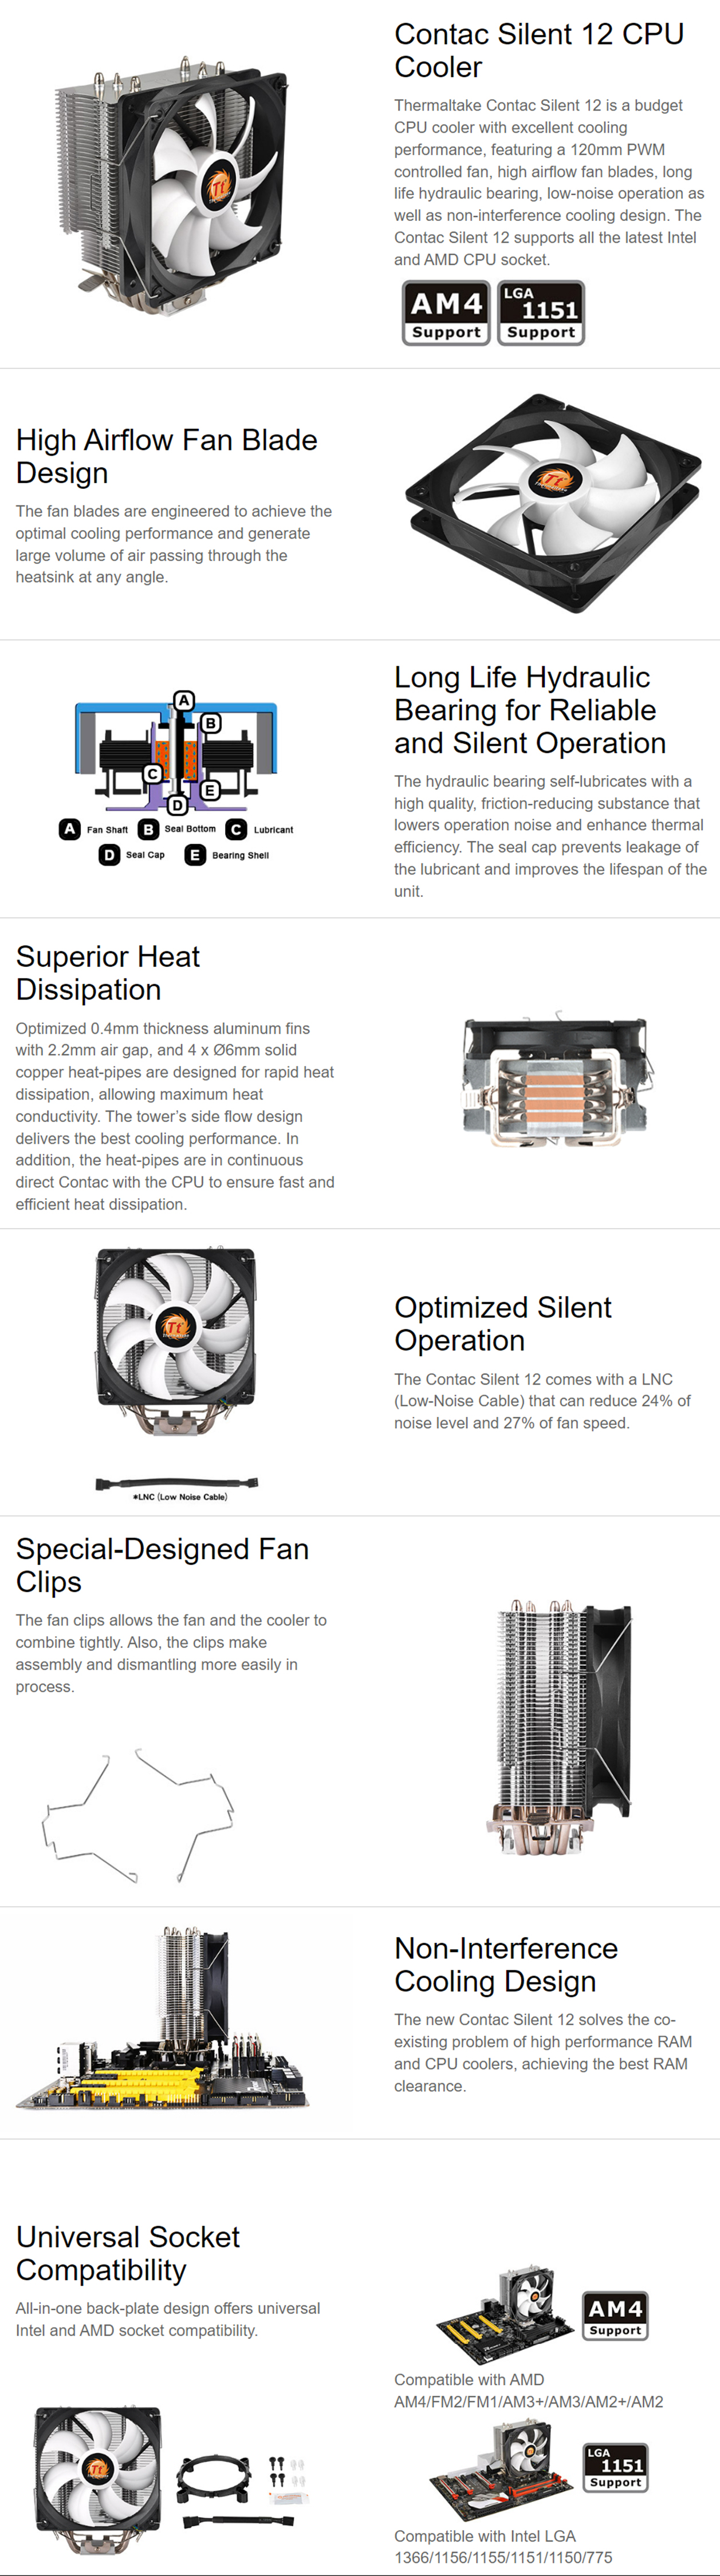 CPU-Cooling-Thermaltake-Contac-Silent-12-CPU-Cooler-AM4-Support-3